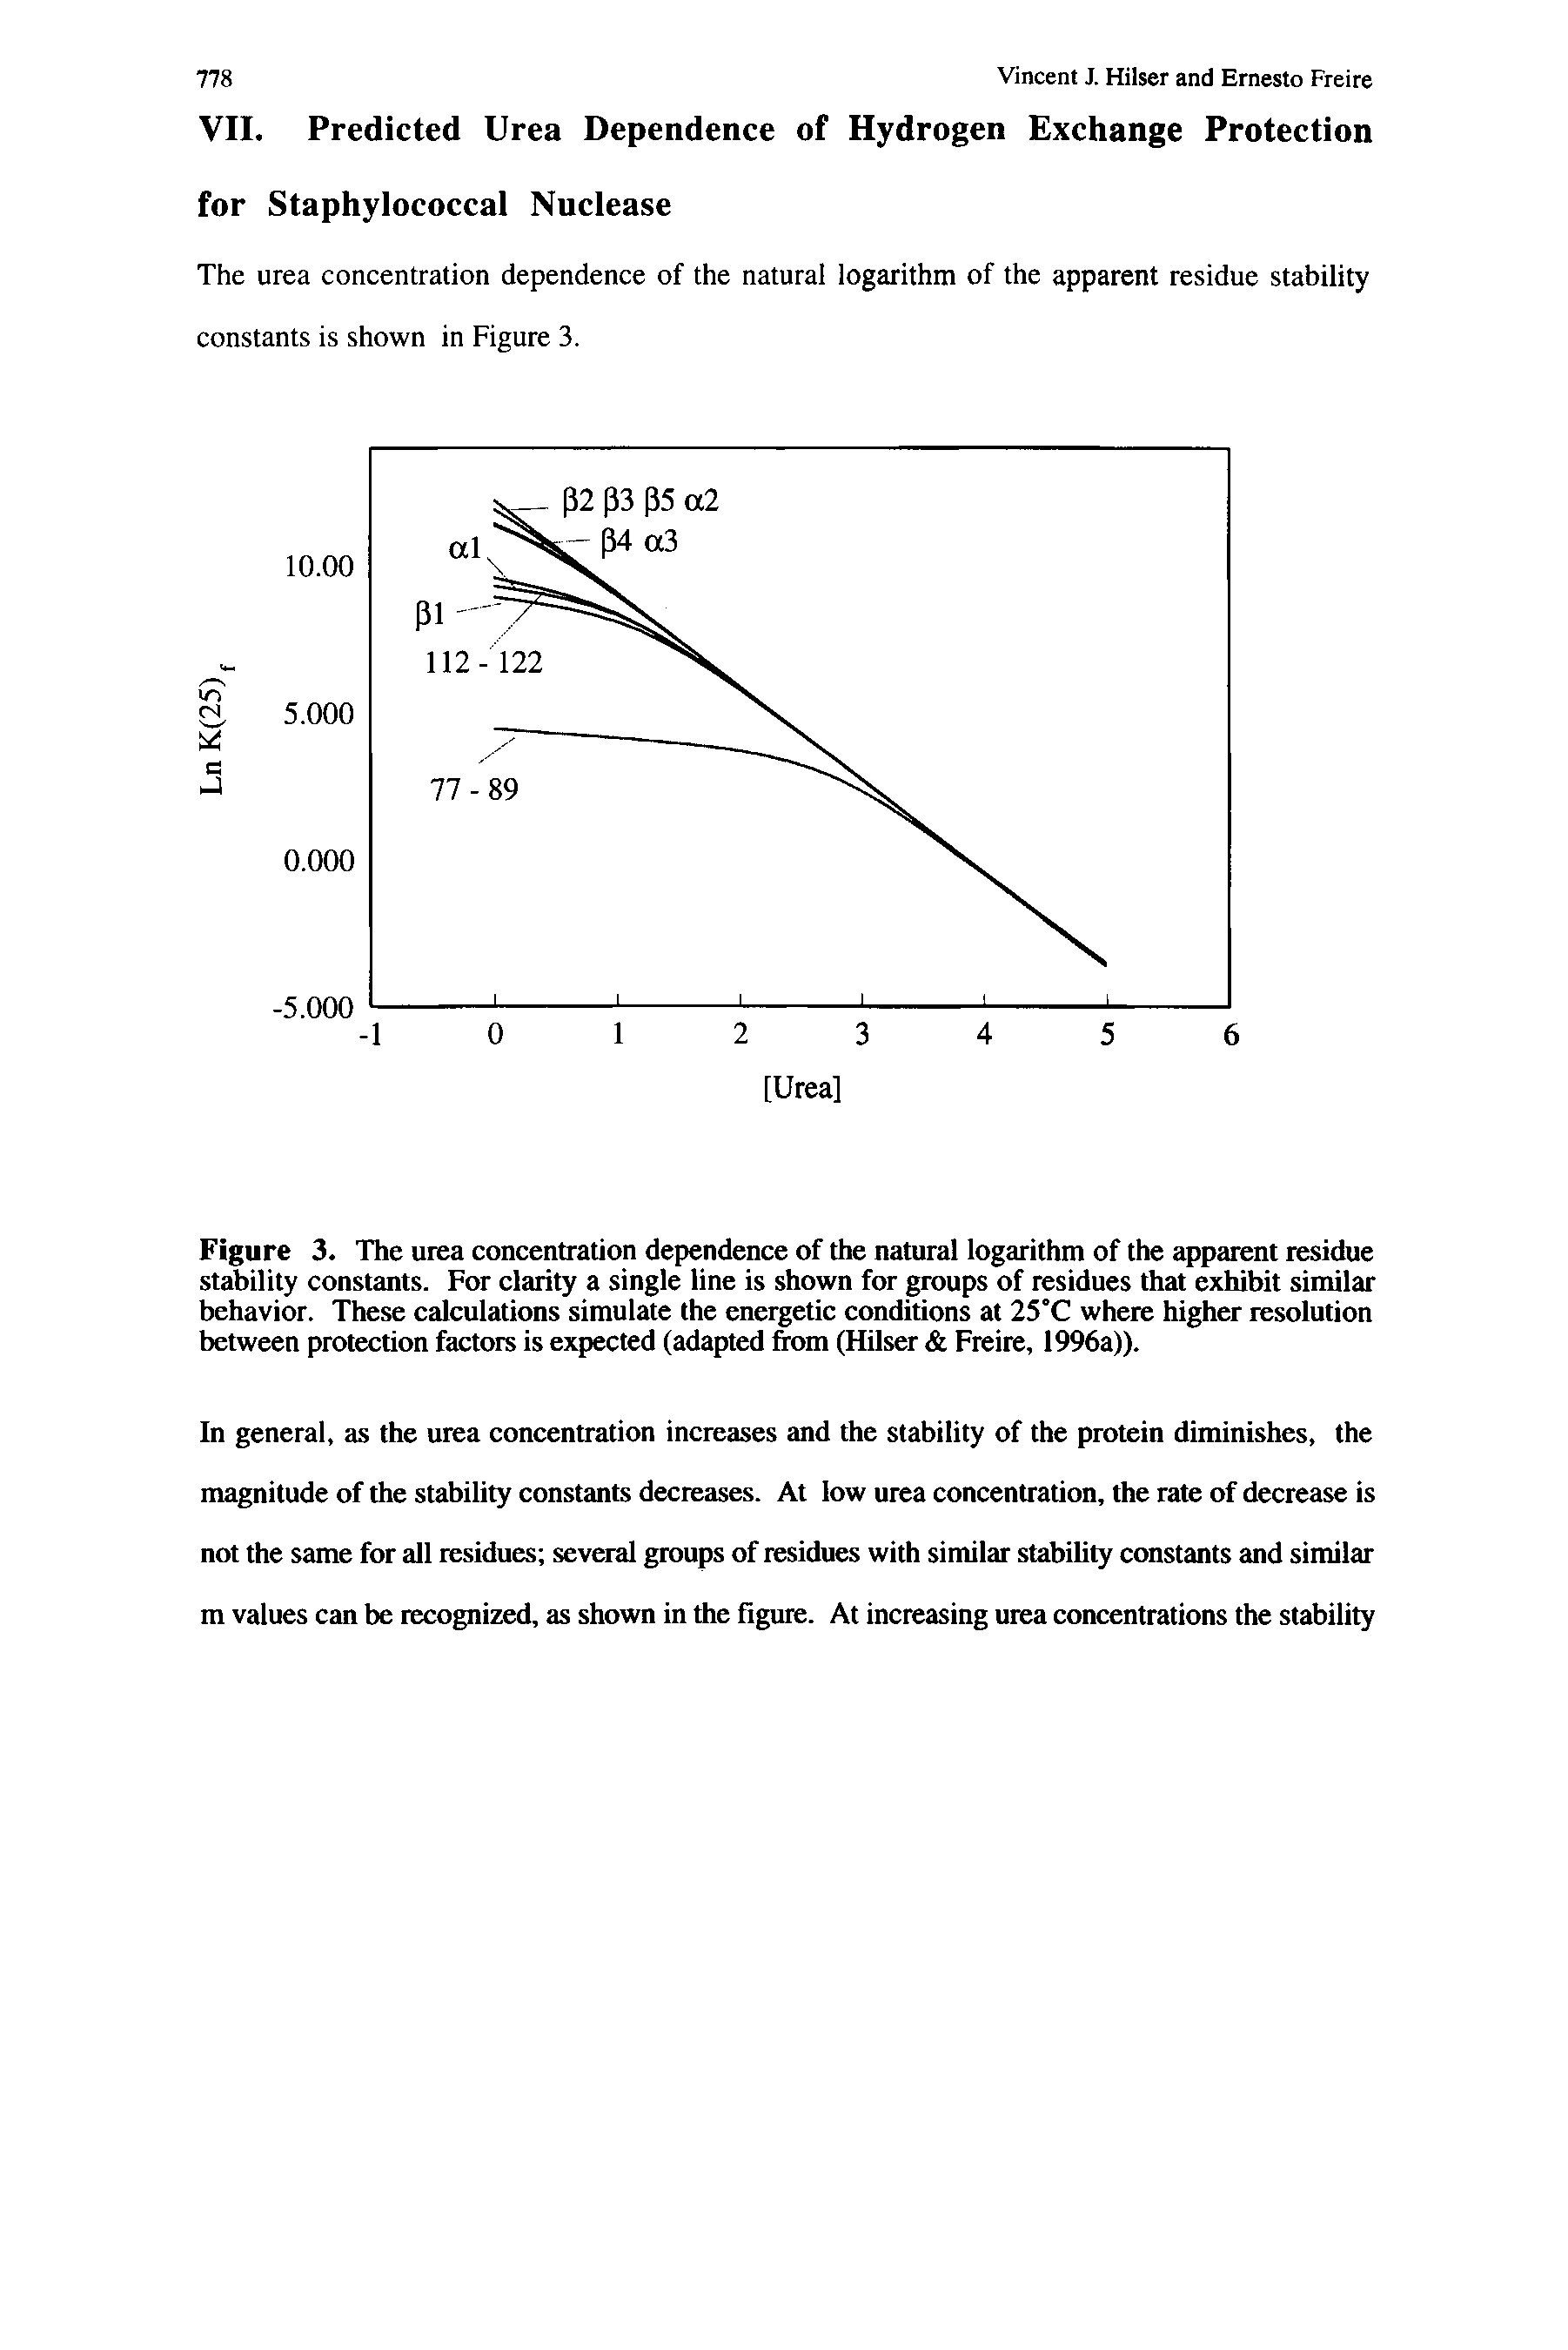 Figure 3. The urea concentration dependence of the natural logarithm of the apparent residue stability constants. For clarity a single line is shown for groups of residues that exhibit similar behavior. These calculations simulate the energetic conditions at 25°C where higher resolution between protection factors is expected (adapted from (Hilser Freire, 1996a)).